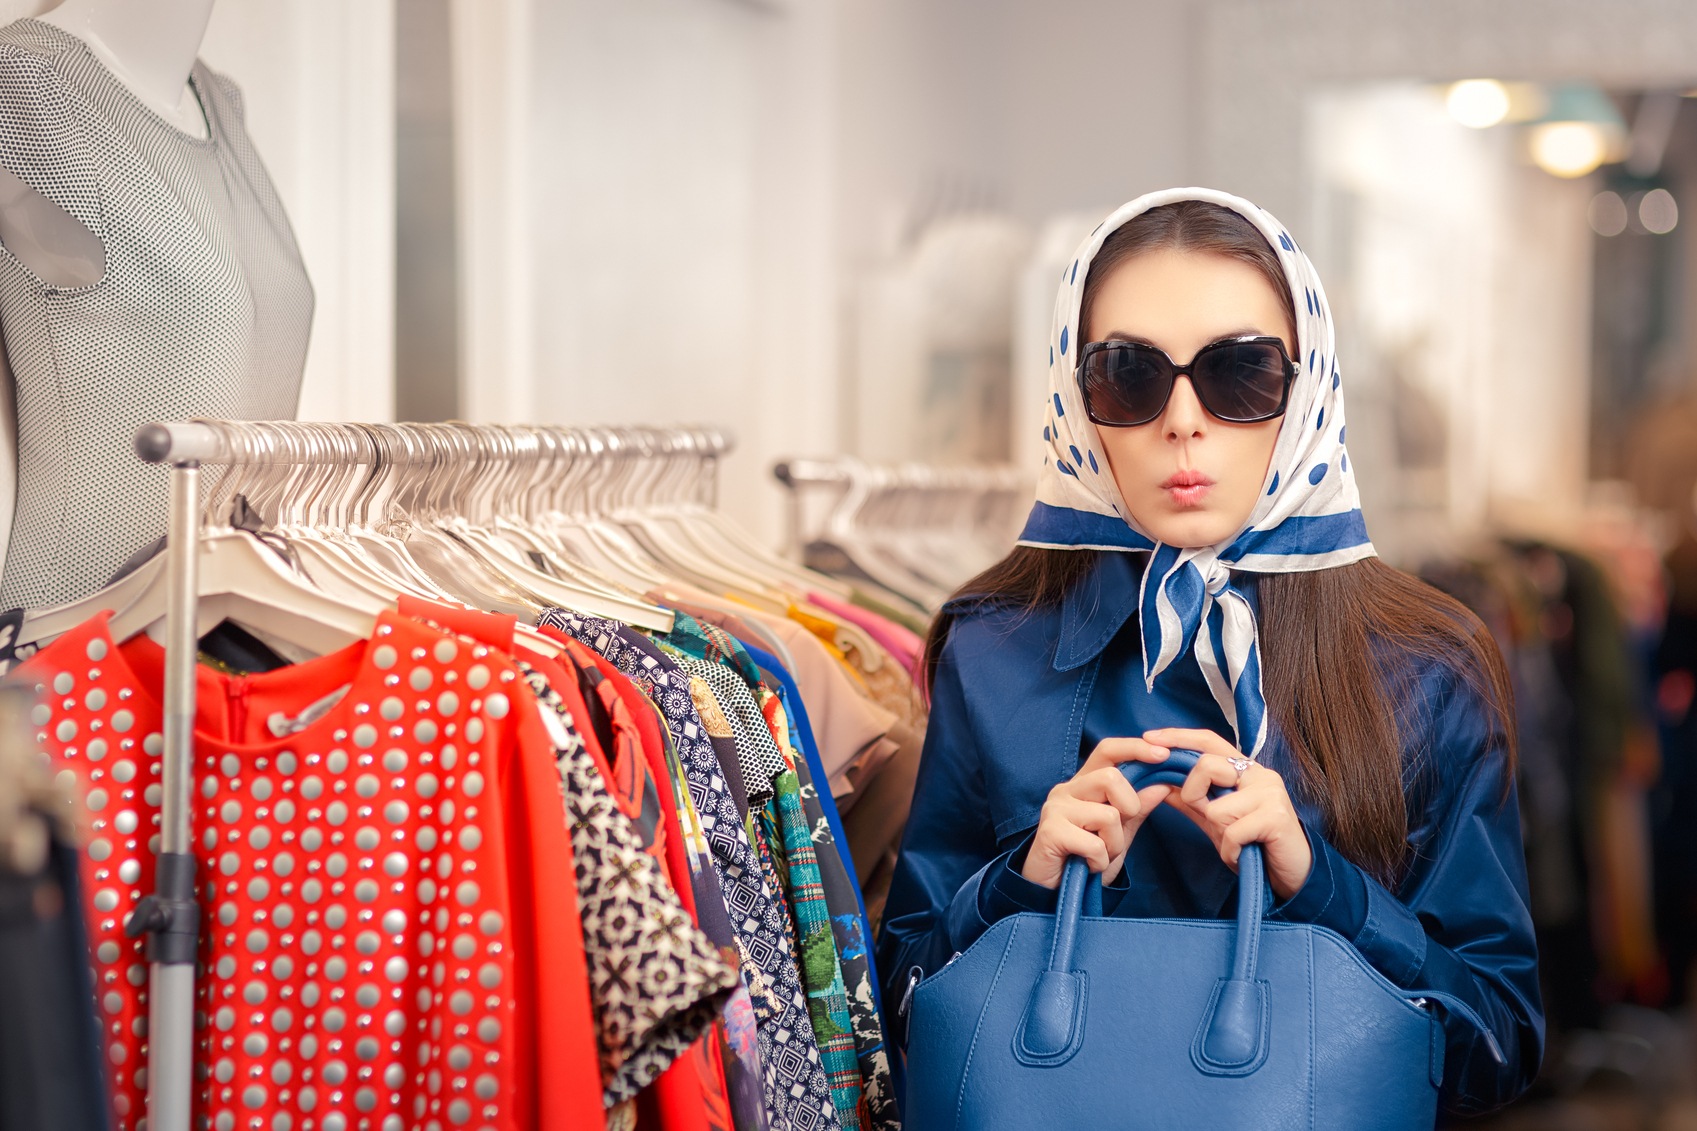 5 Ways to Prevent Buyer’s Remorse & Become a Savvy Shopper